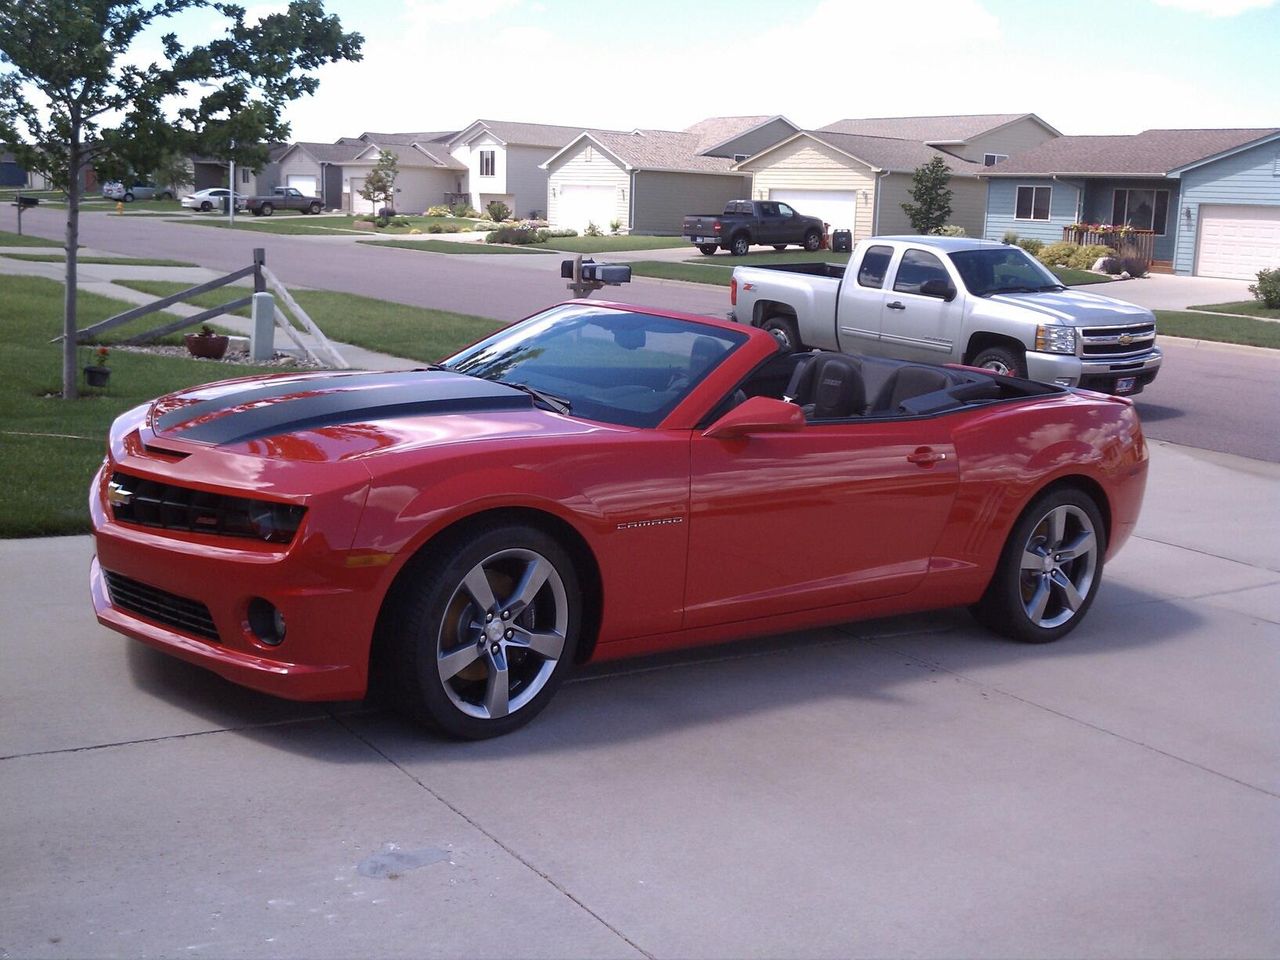 2012 Chevrolet Camaro SS | Sioux Falls, SD, Victory Red (Red & Orange), Rear Wheel